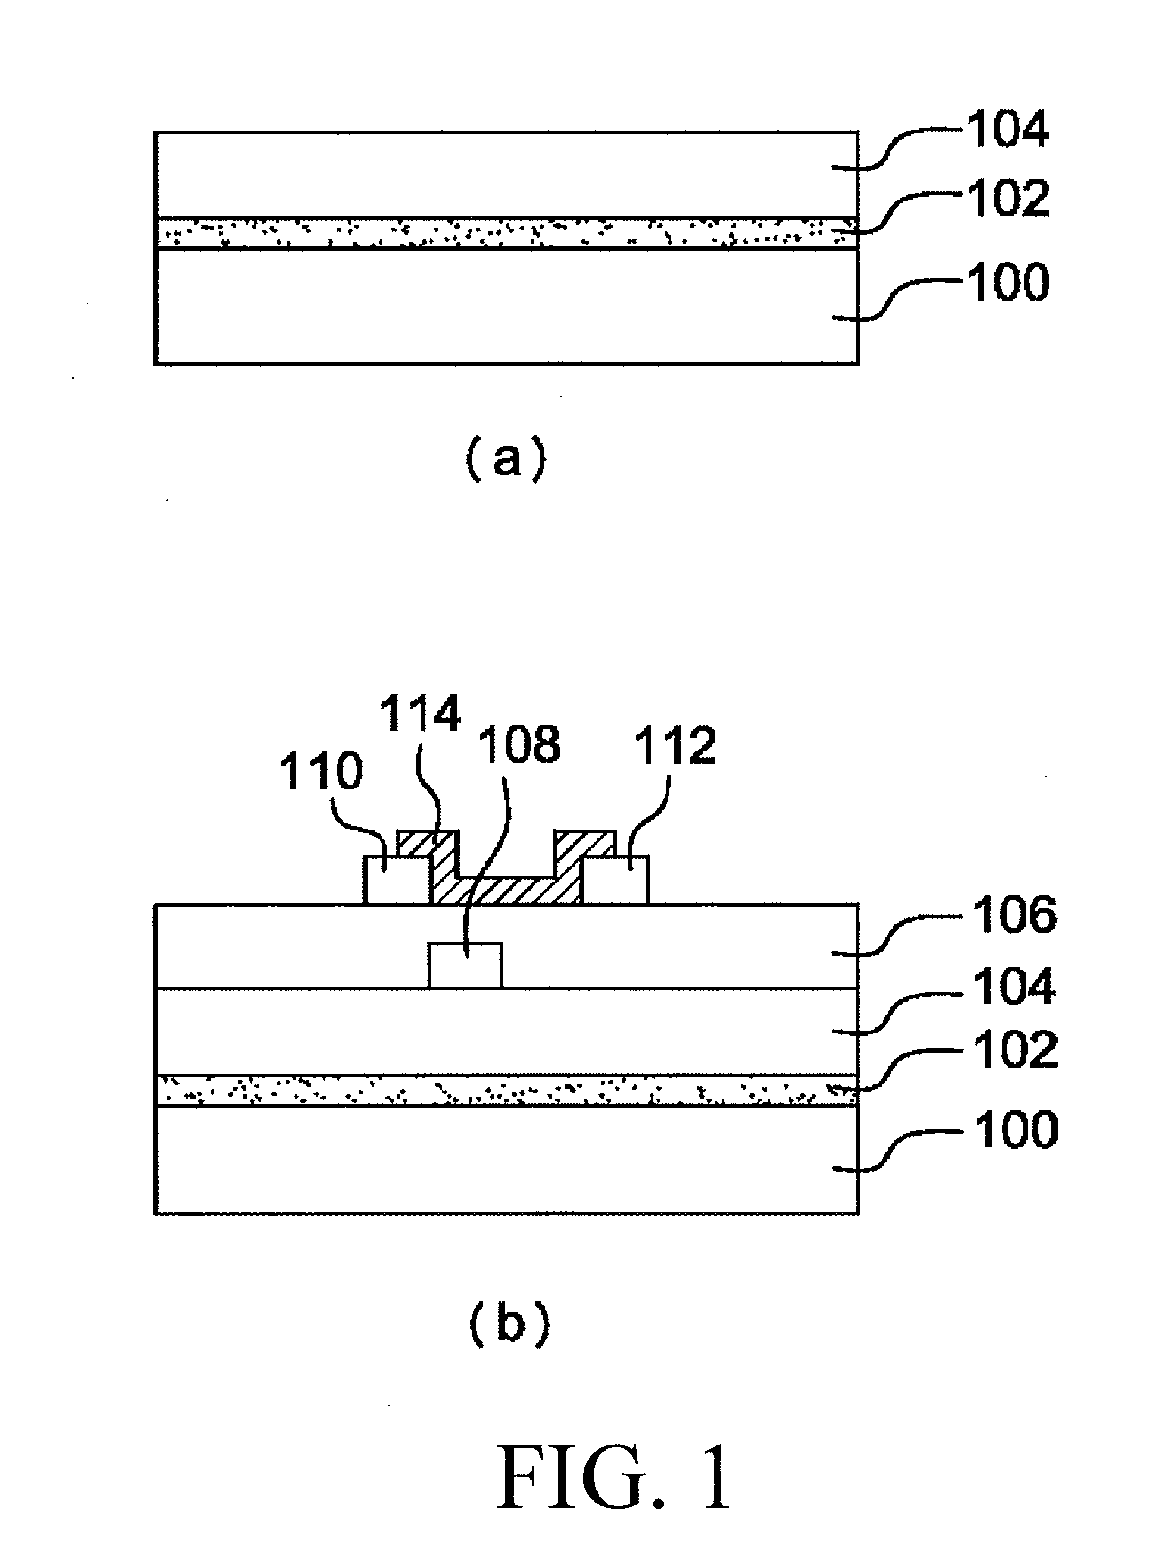 Method for fabricating a flexible device